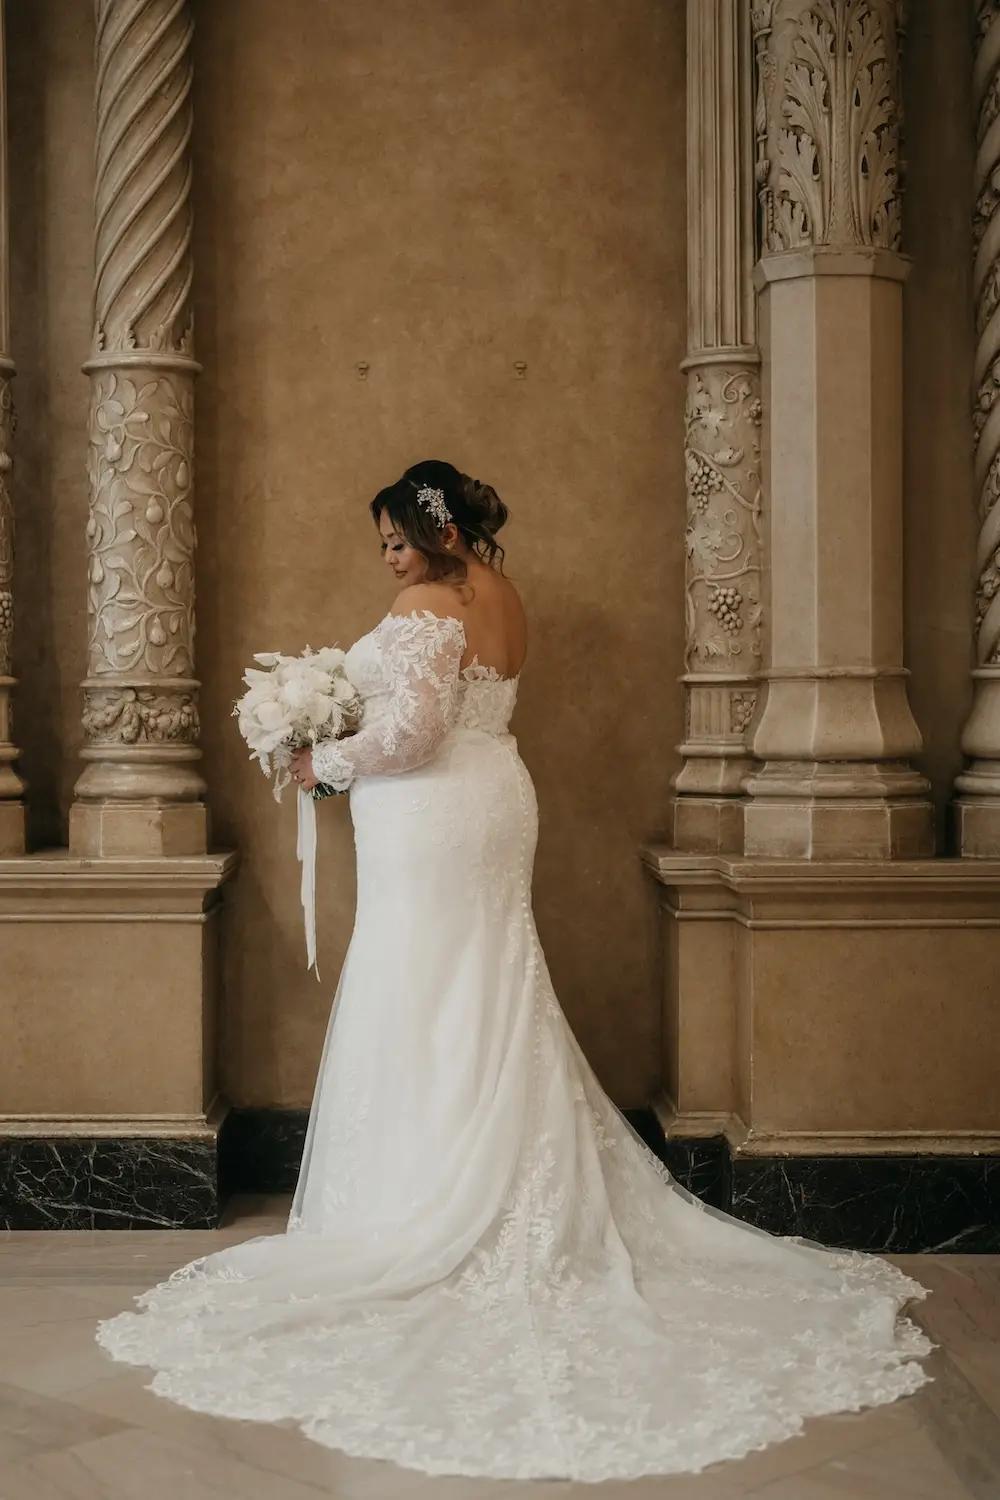 Aivanna Wears Off The Shoulders Lace Wedding Dress with Long Sleeves. Mobile Image